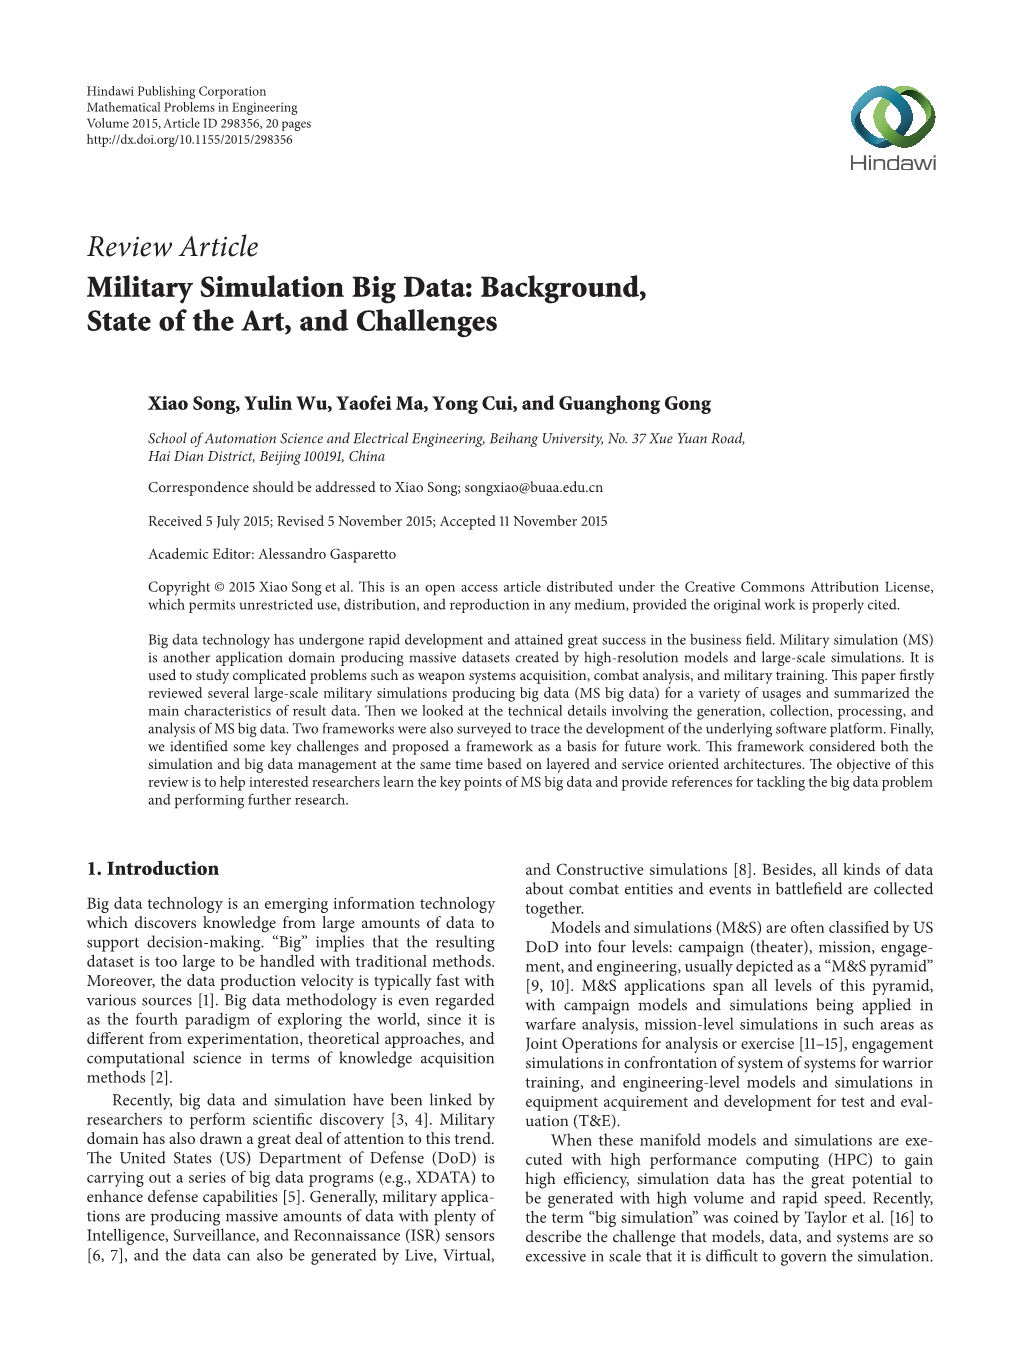 Military Simulation Big Data: Background, State of the Art, and Challenges